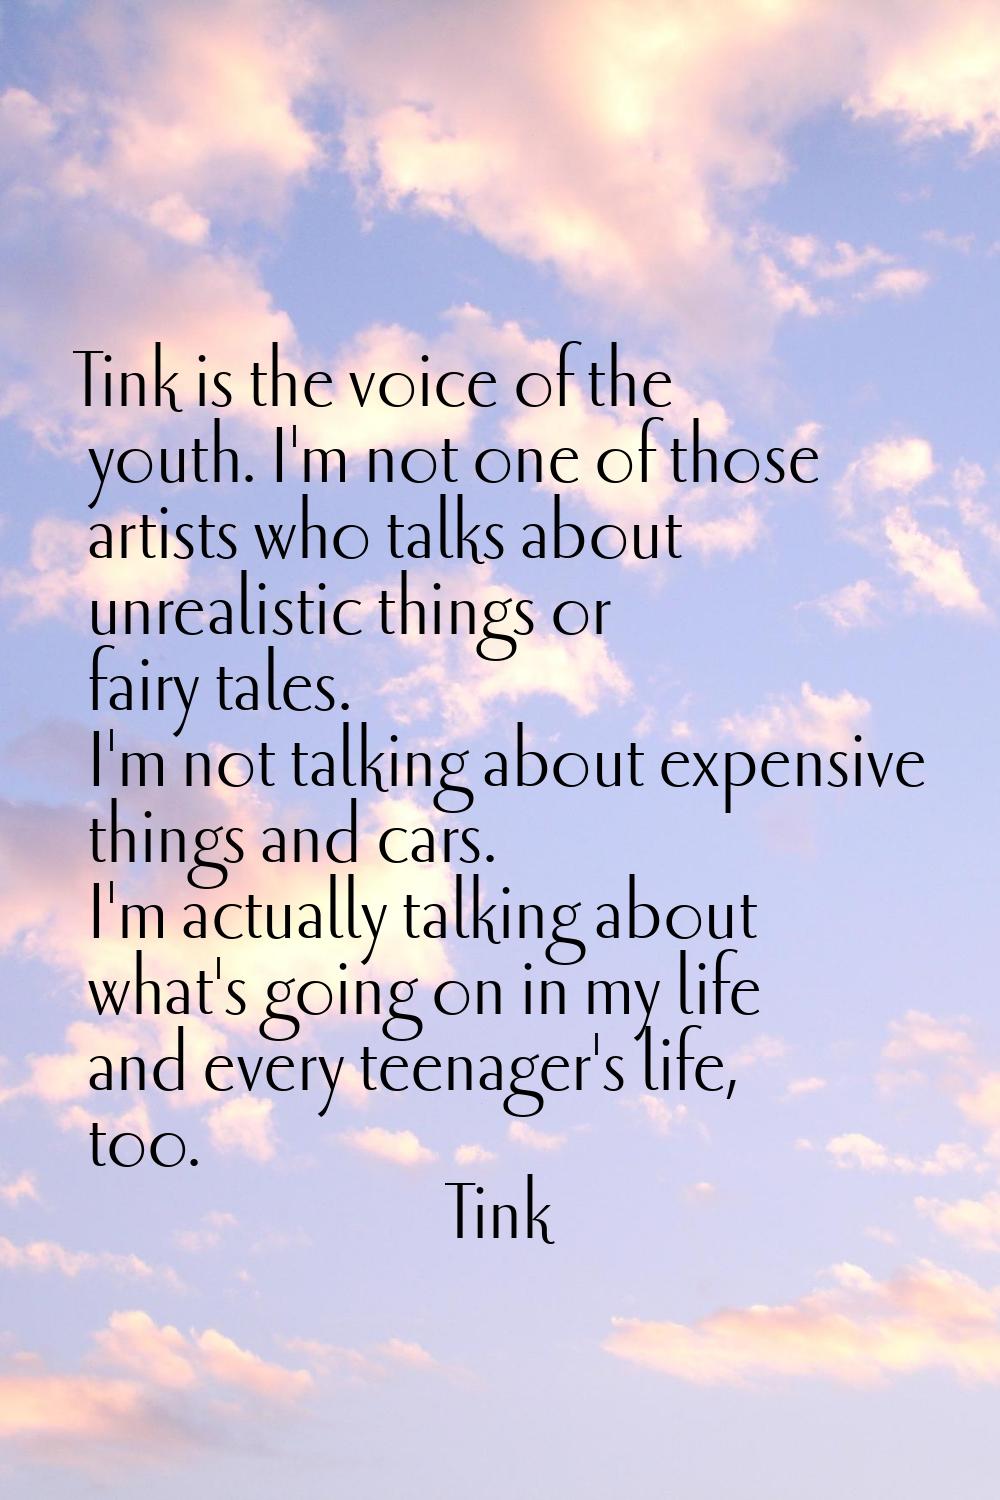 Tink is the voice of the youth. I'm not one of those artists who talks about unrealistic things or 